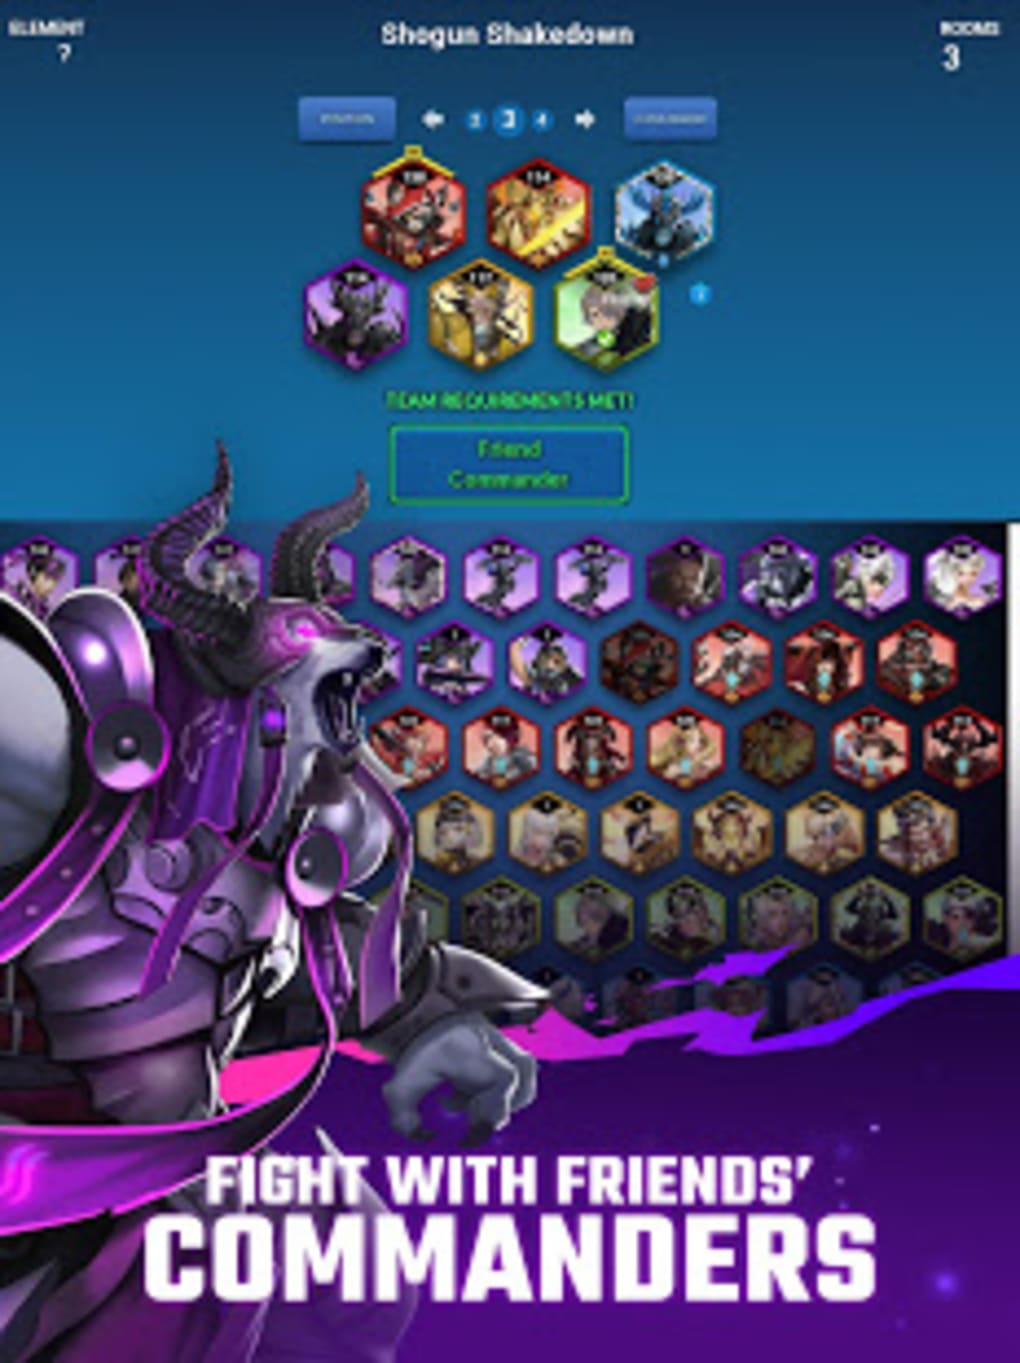 Epic Games Launches Battle Breakers, a Tactical Role-Playing Game for  Android, iOS, and PC